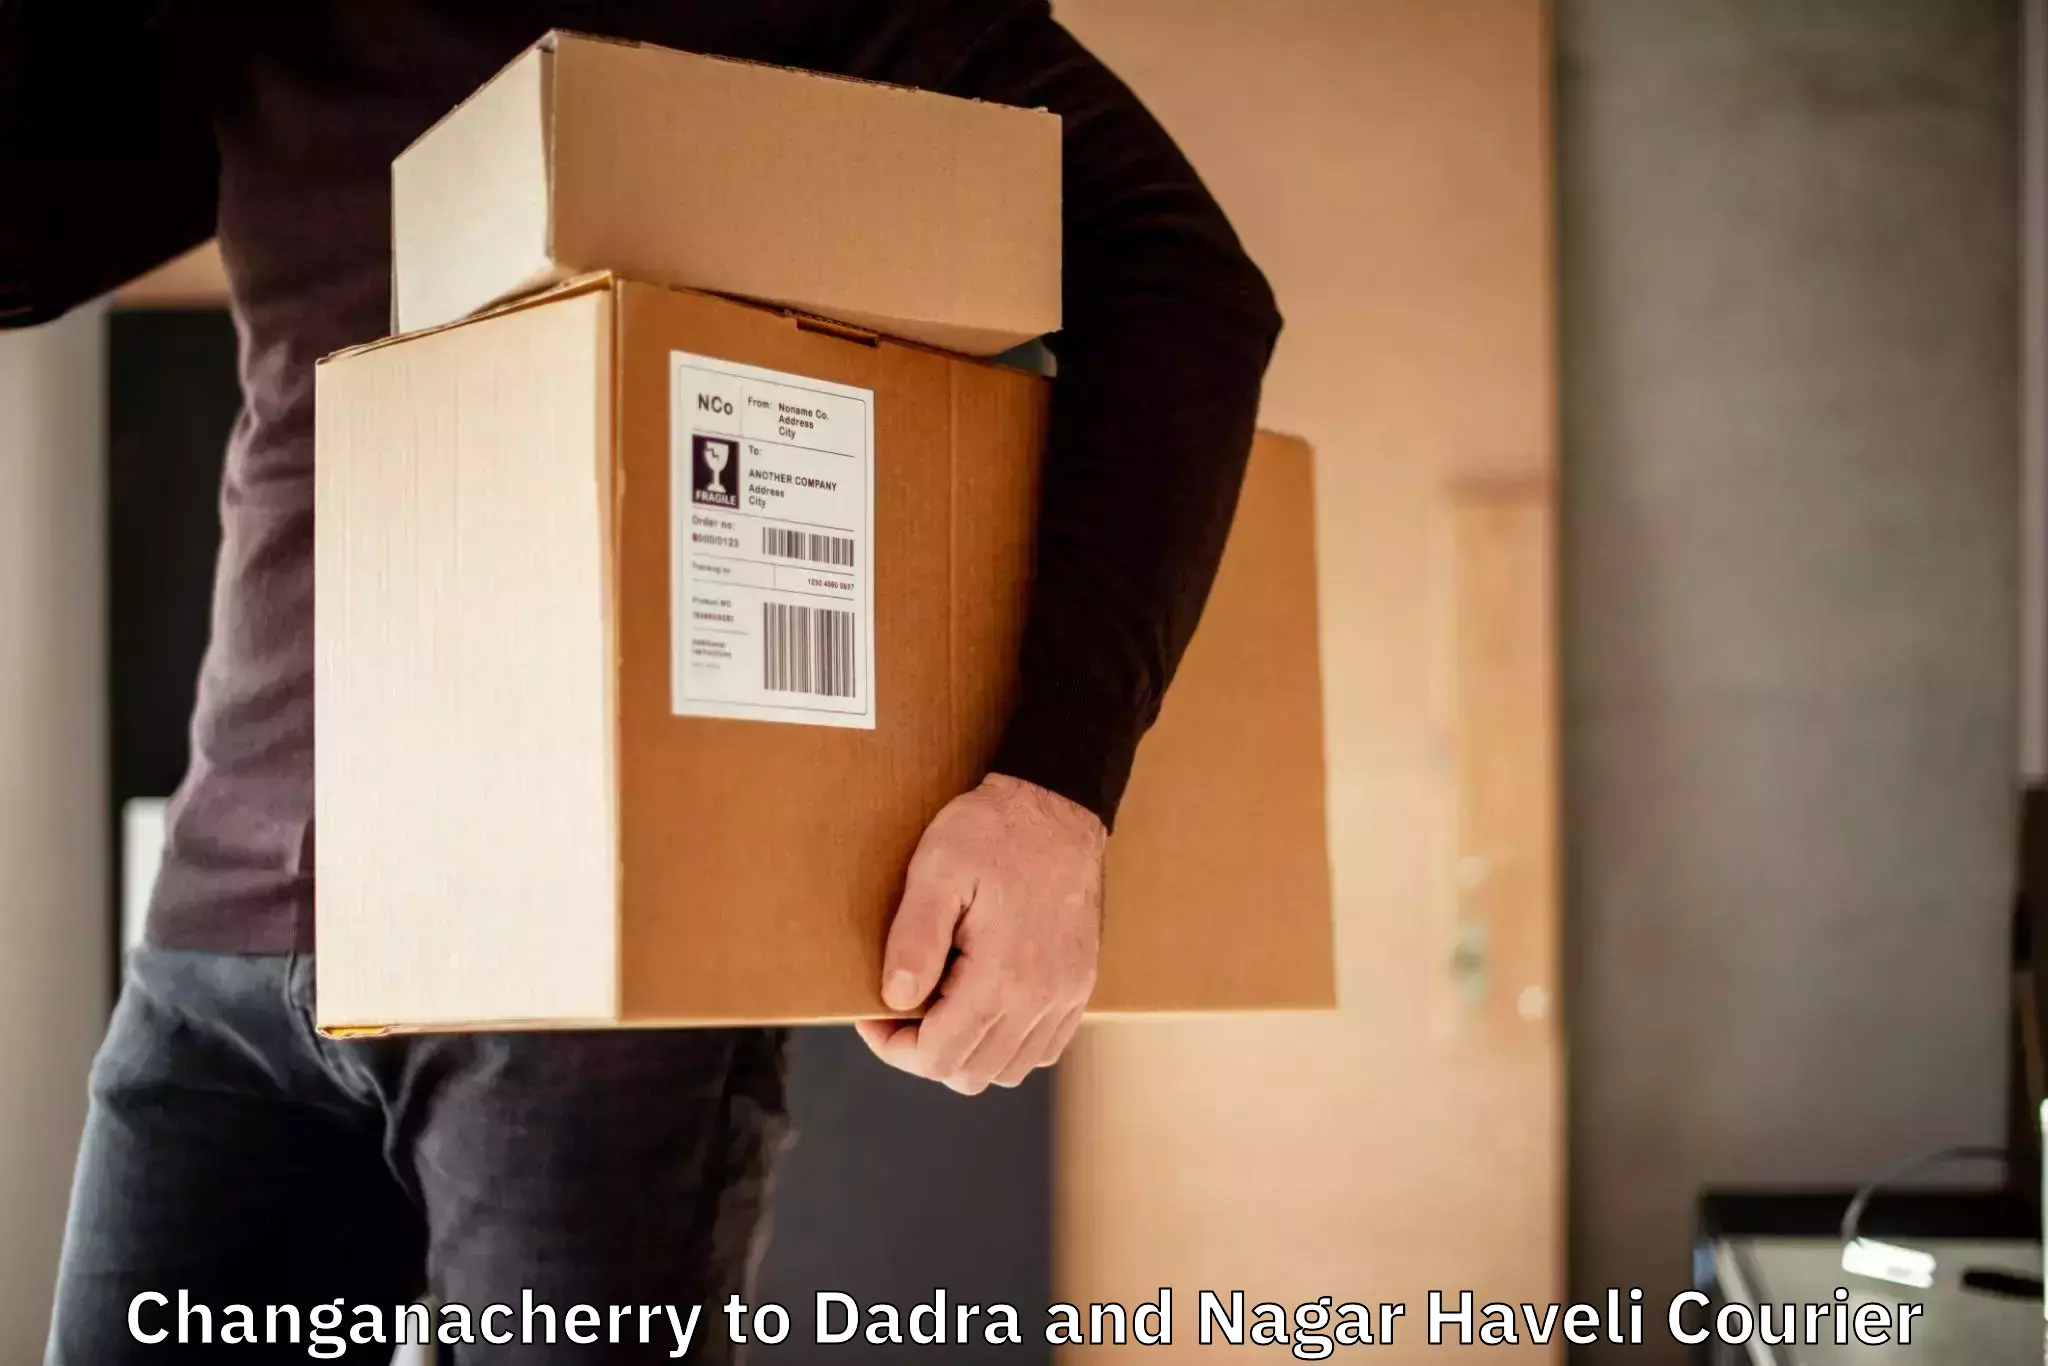 Easy access courier services in Changanacherry to Dadra and Nagar Haveli